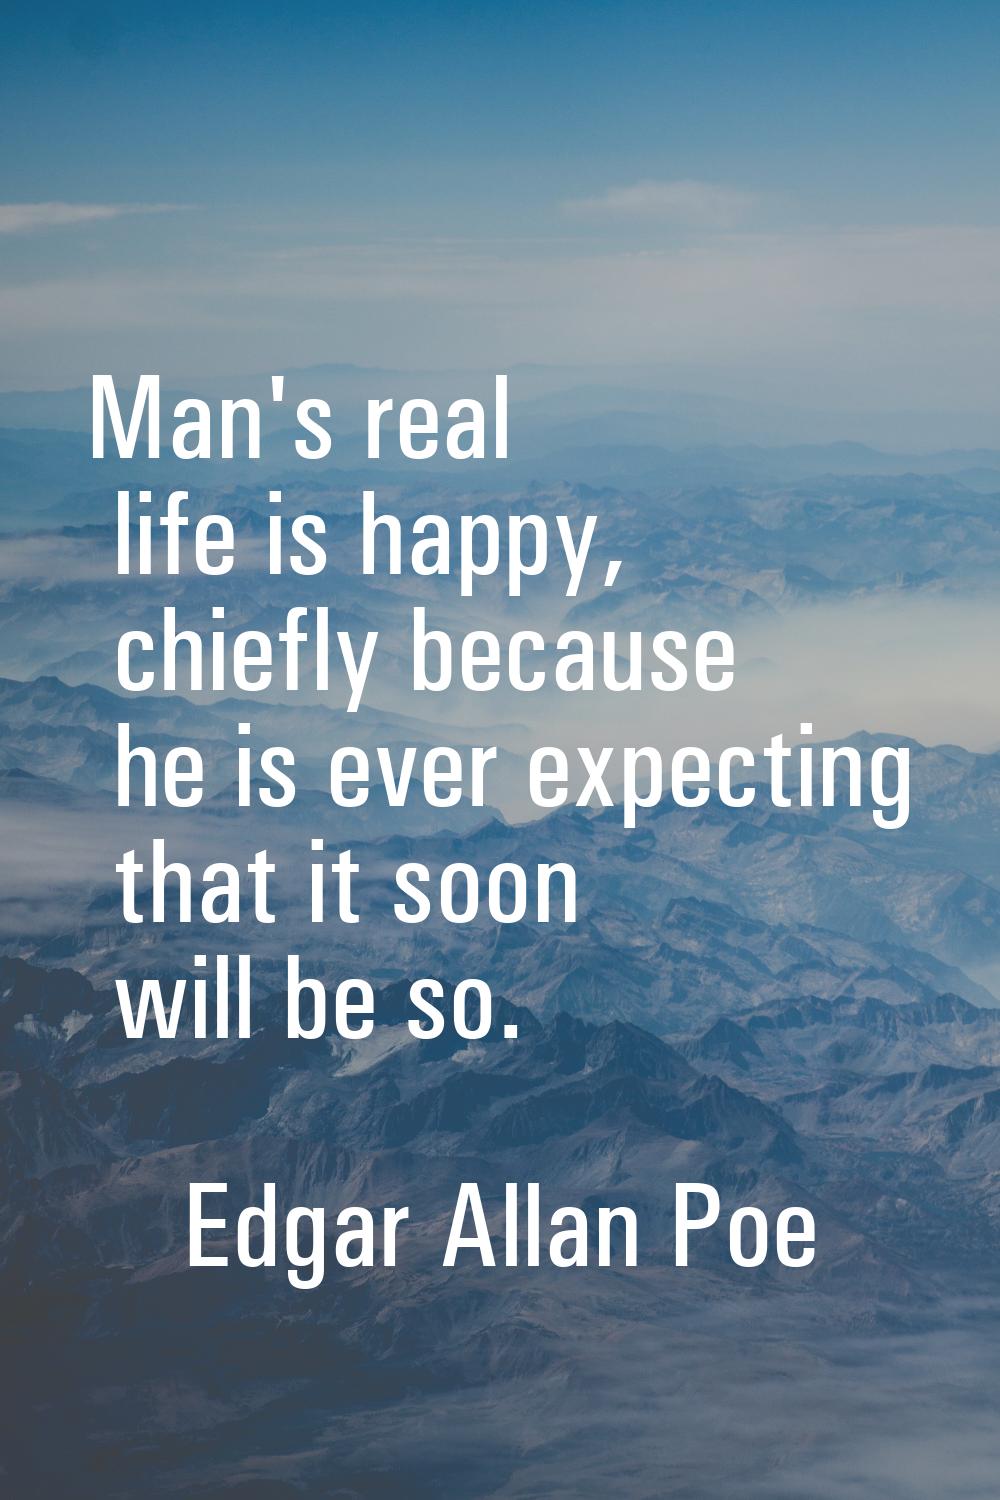 Man's real life is happy, chiefly because he is ever expecting that it soon will be so.